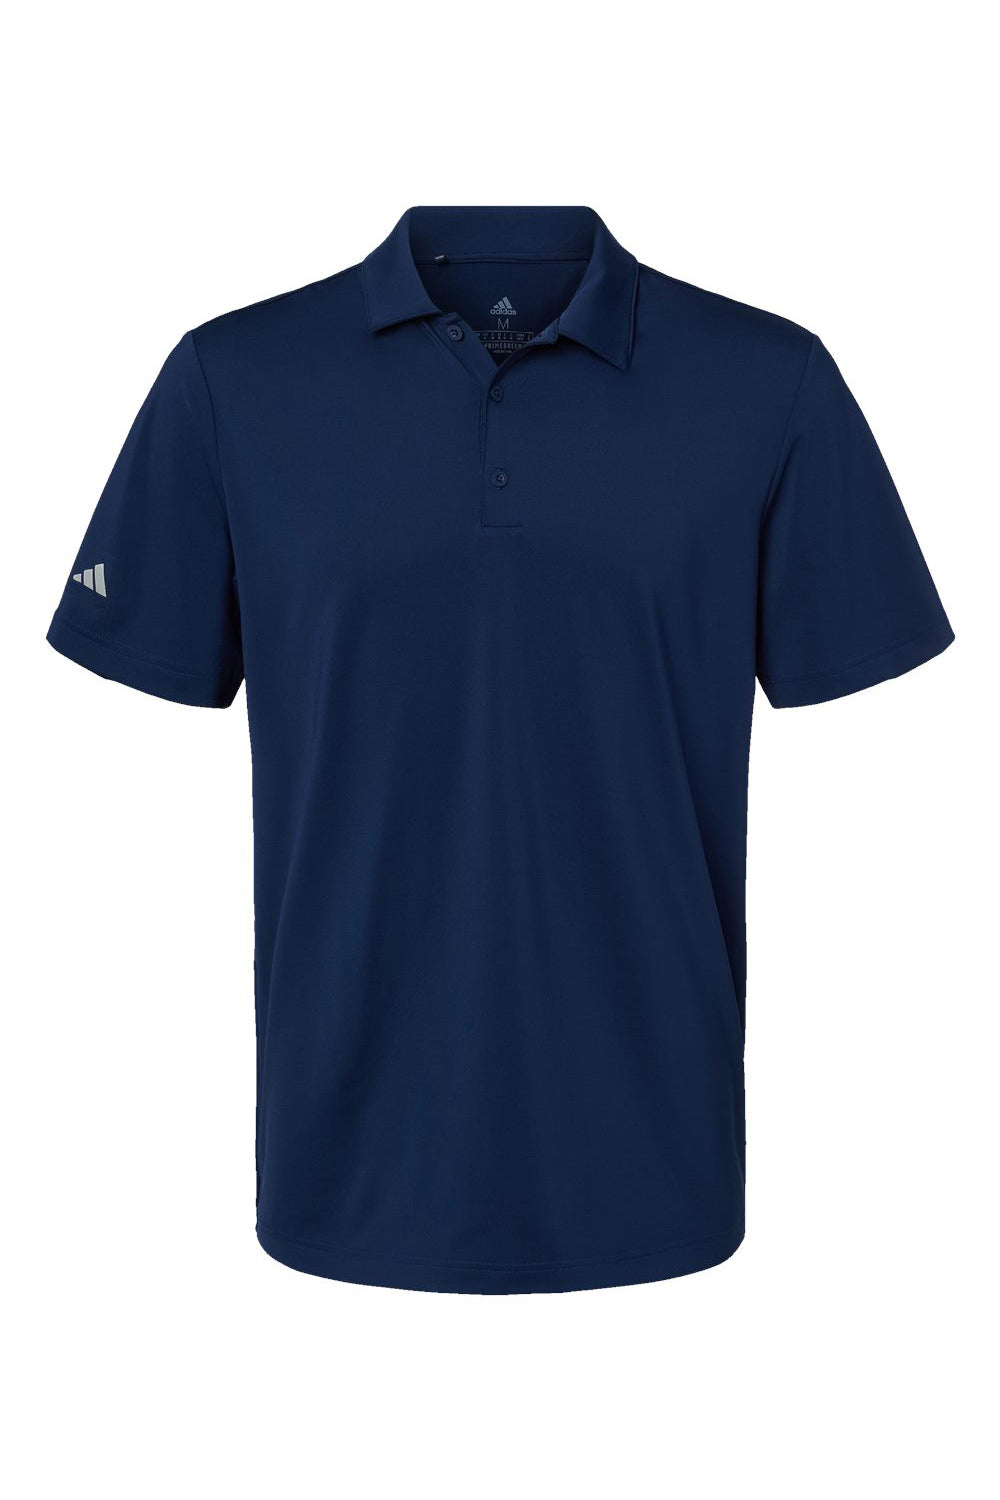 Adidas A514 Mens Ultimate Short Sleeve Polo Shirt Team Navy Blue Flat Front